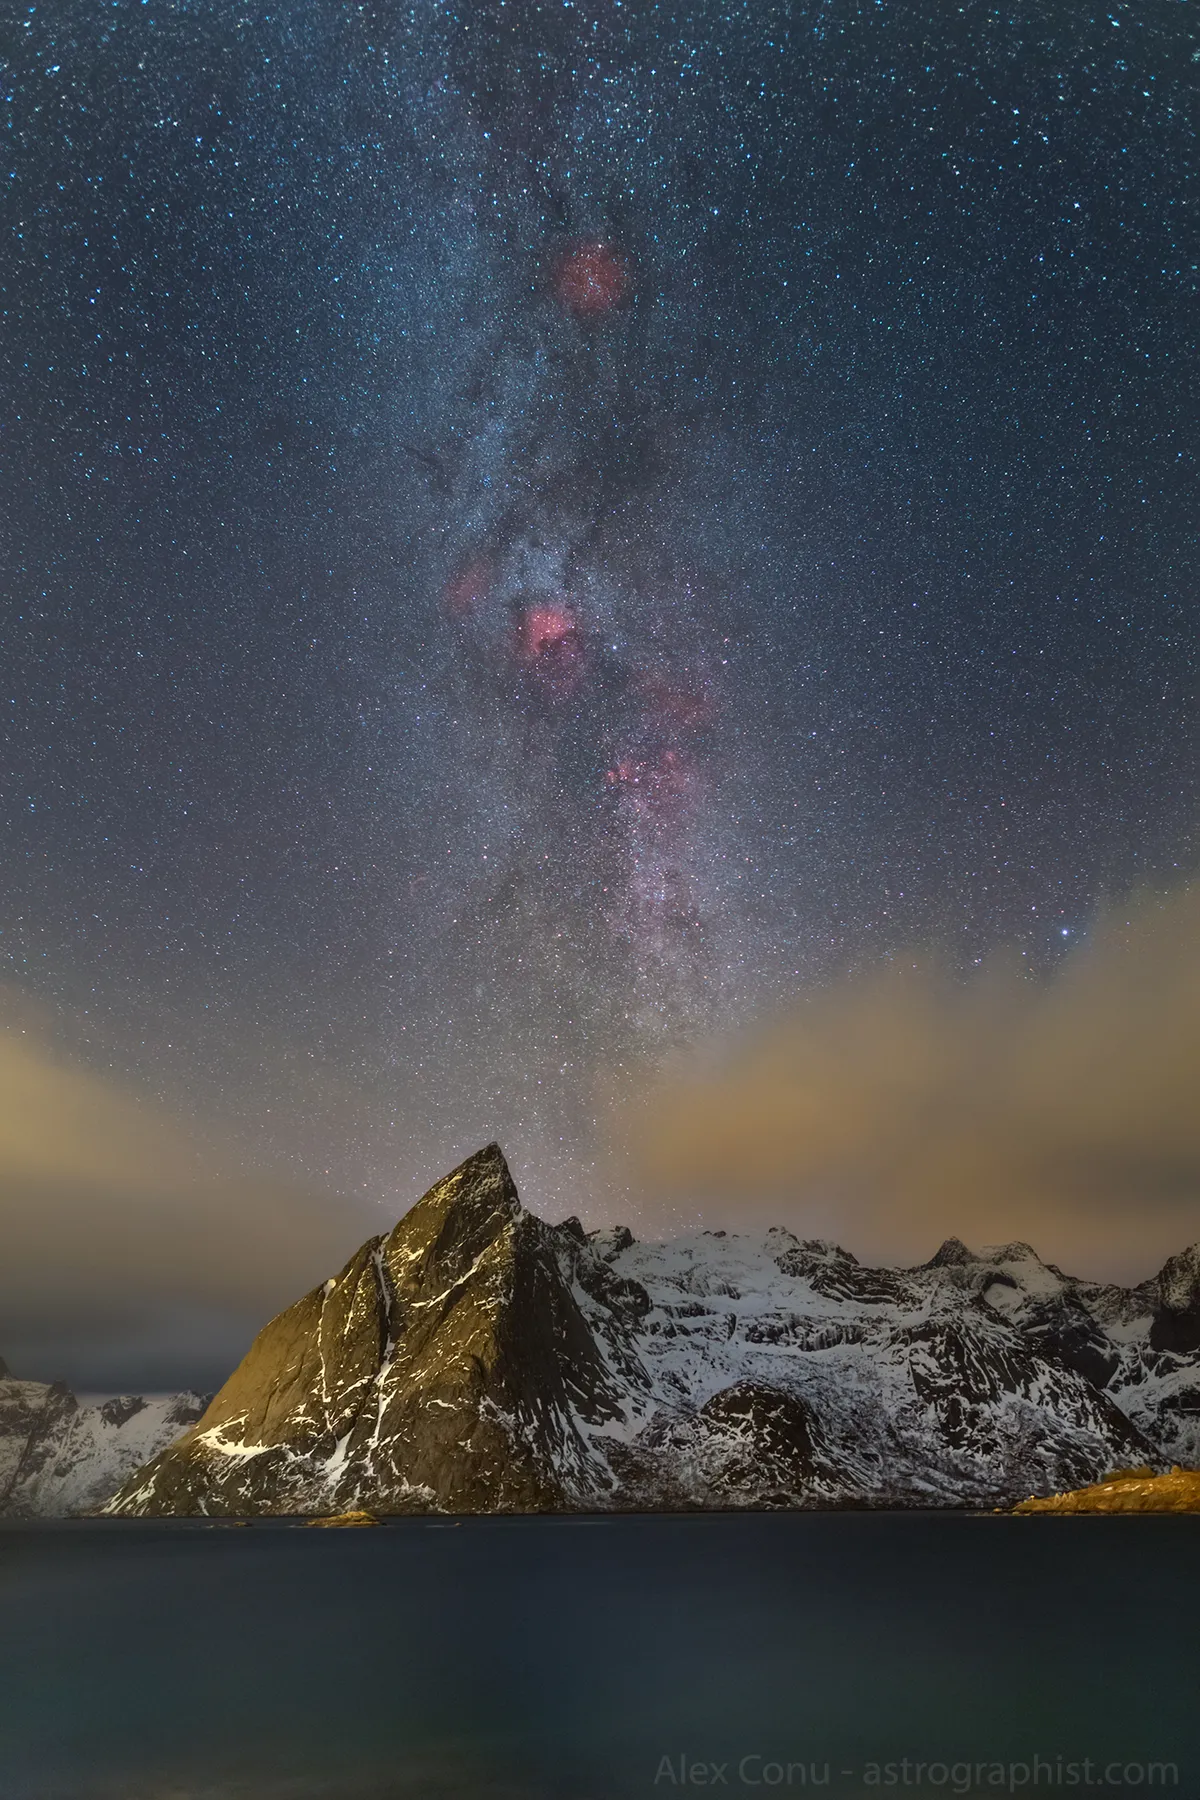 The Milky Way in Lofoten by Alex Conu, Reine, Norway. Equipment: Hutech modified Canon EOS 6D, Sigma 24mm f/1.4 Art, NiSi Natural Night filter.